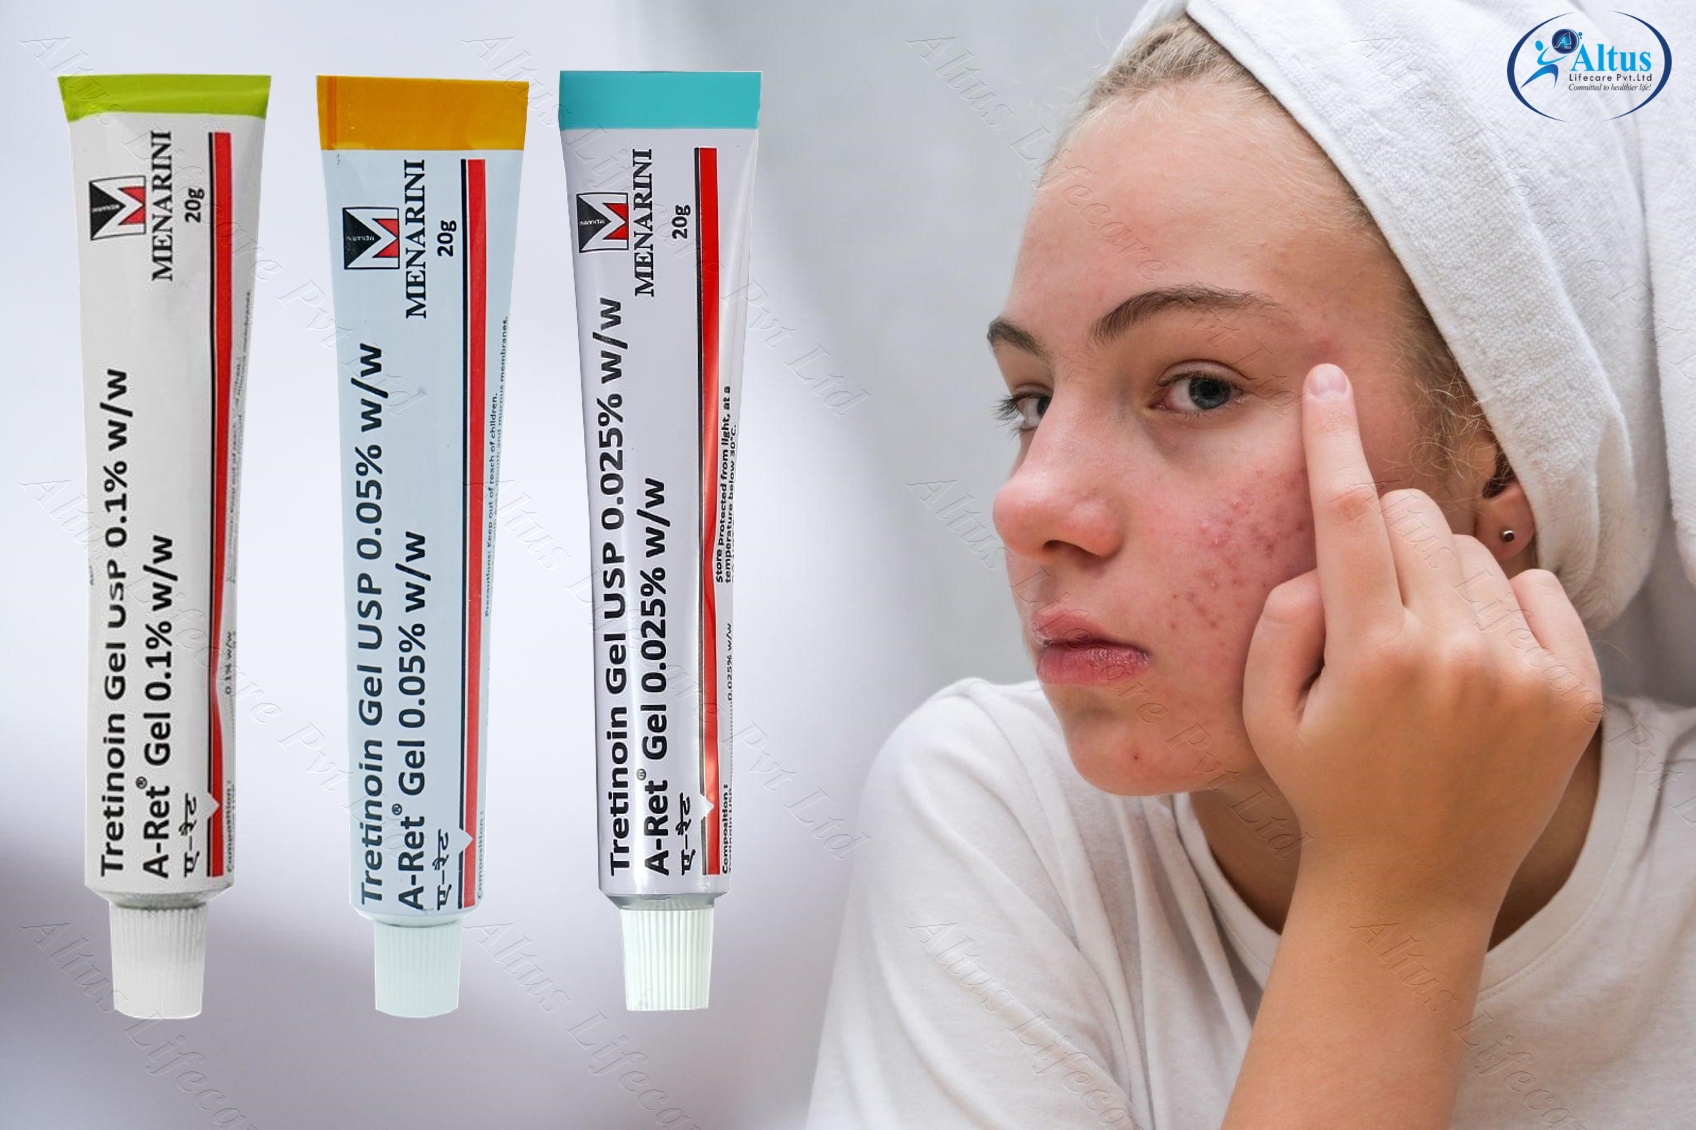 The #1 Acne Treatment They Don’t Want You to Know About – Shocking Results!